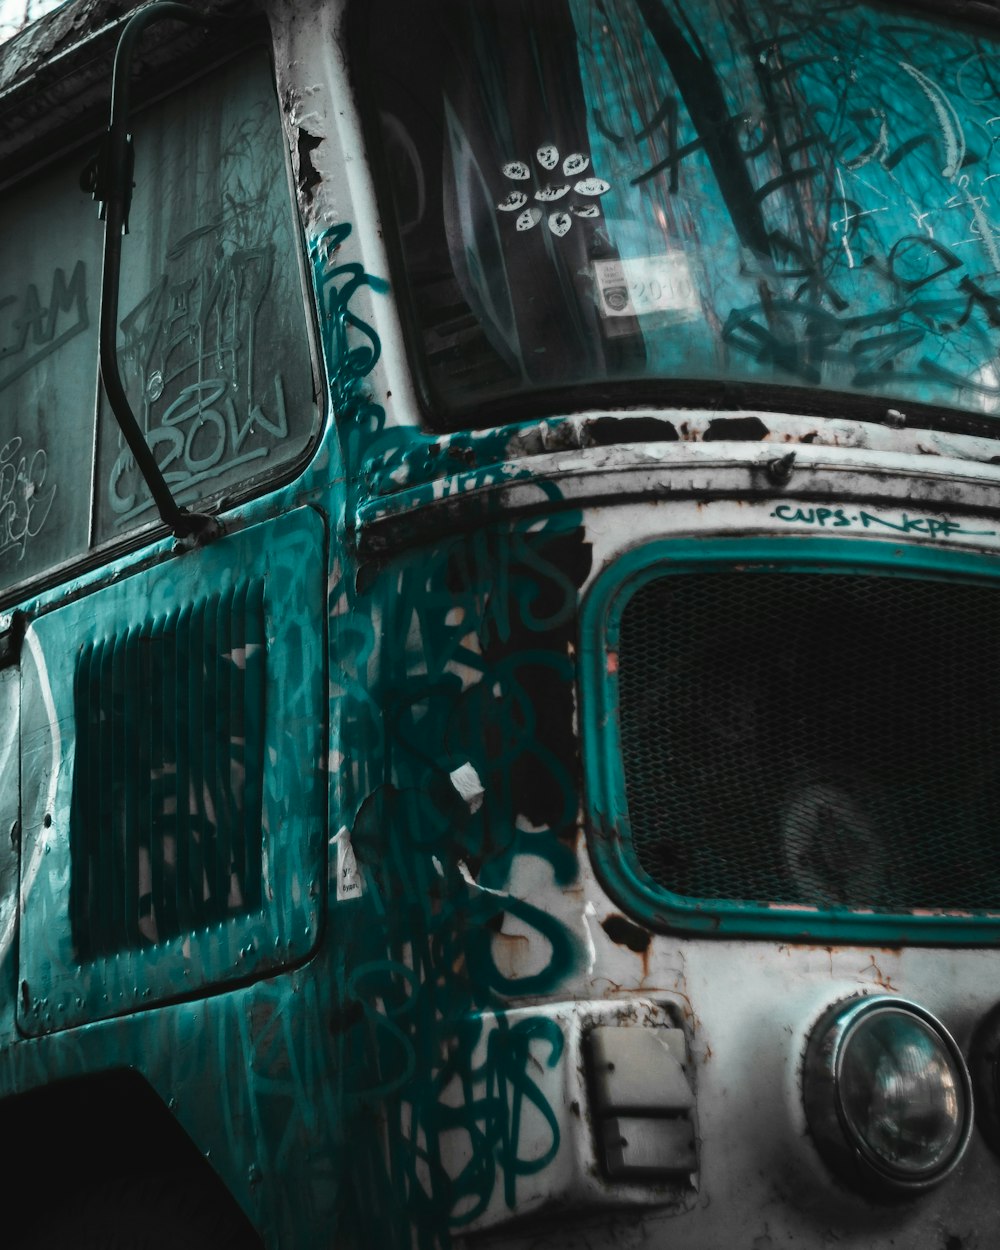 a green and white bus with graffiti on it